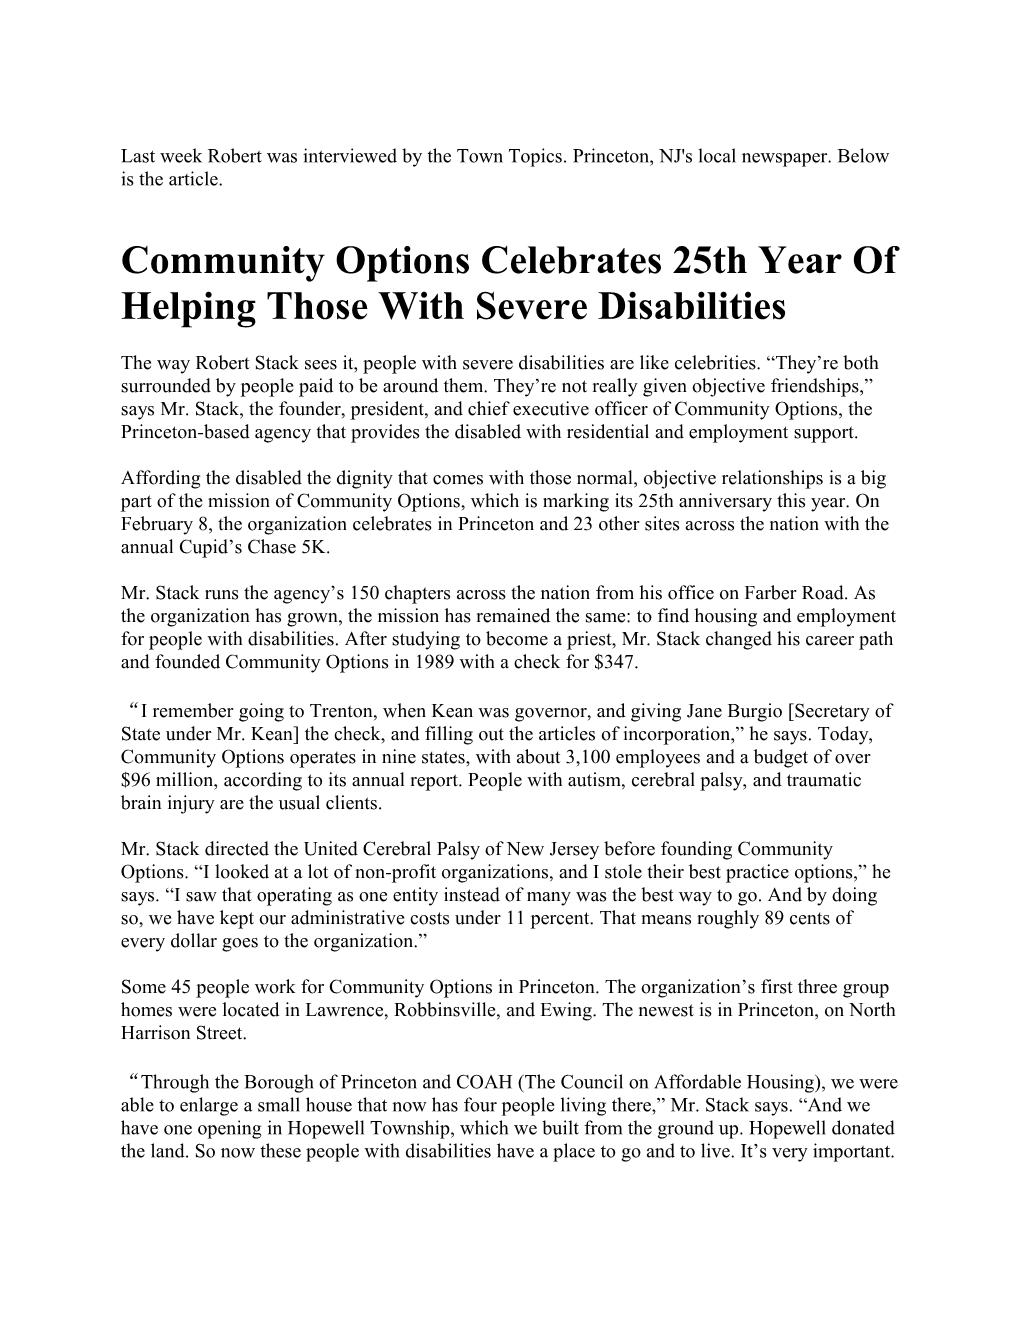 Community Options Celebrates 25Th Year of Helping Those with Severe Disabilities